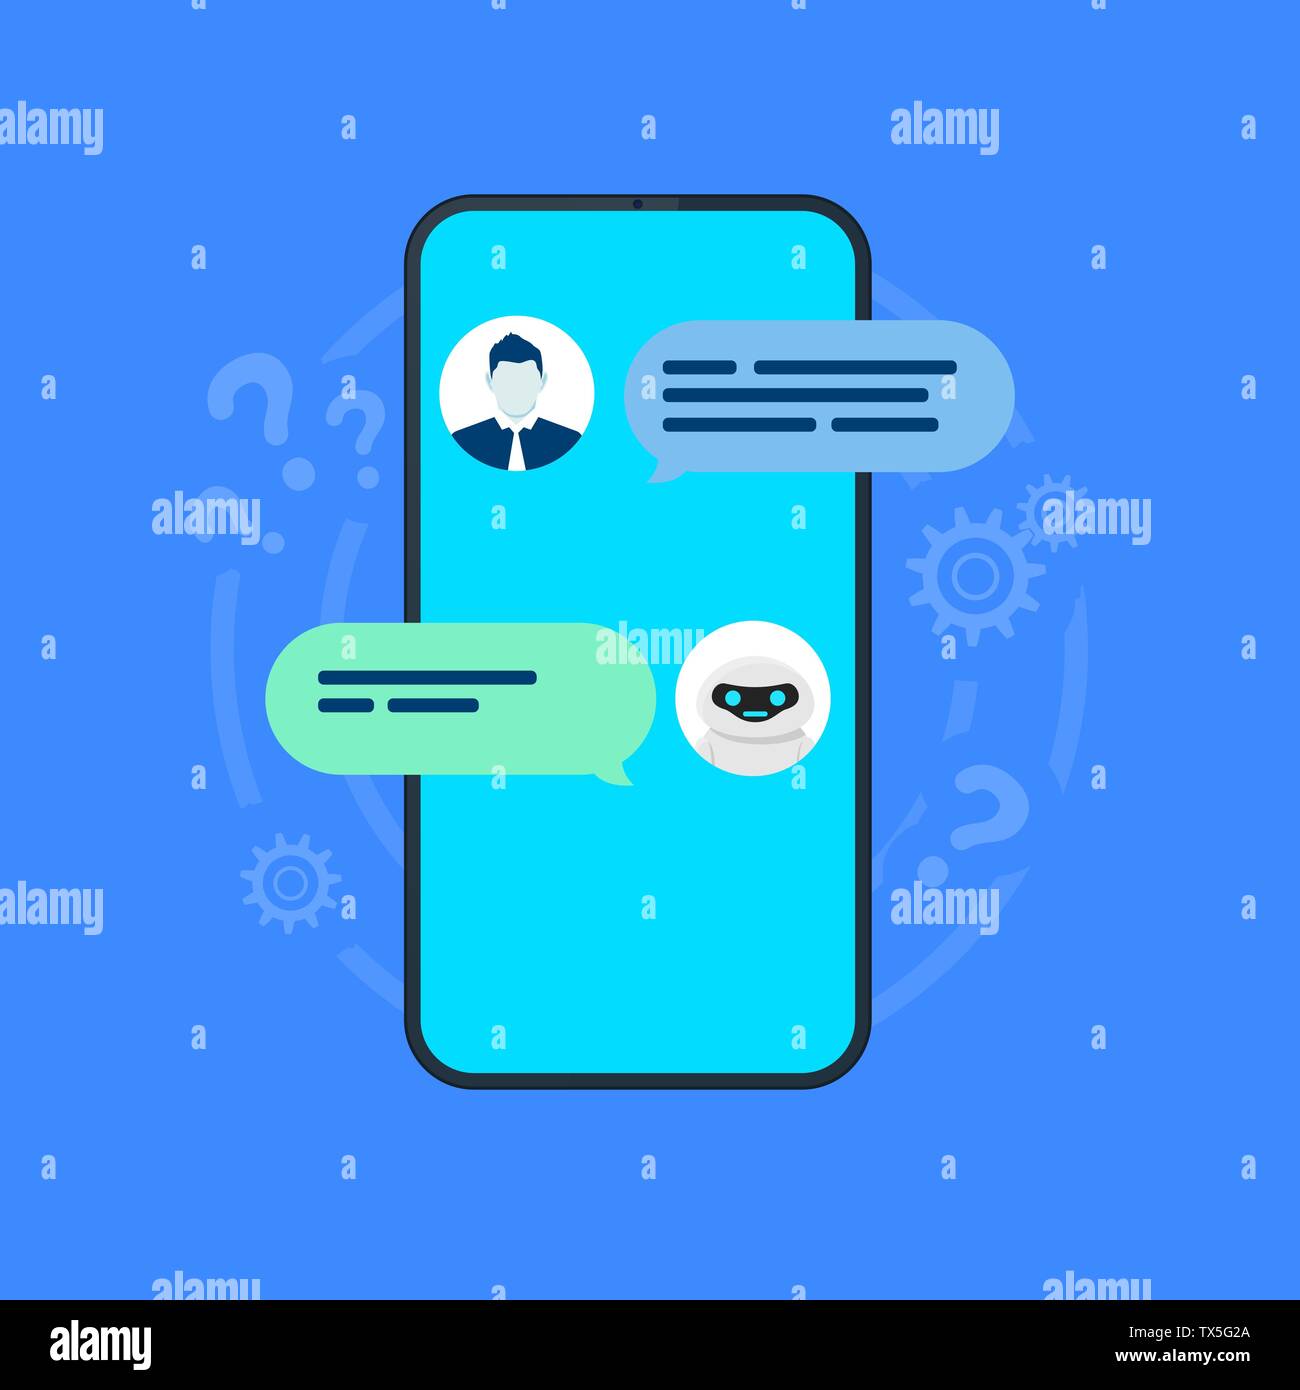 Chatbot illustration. Smartphone with user and robot chatting on screen. Vector Stock Vector